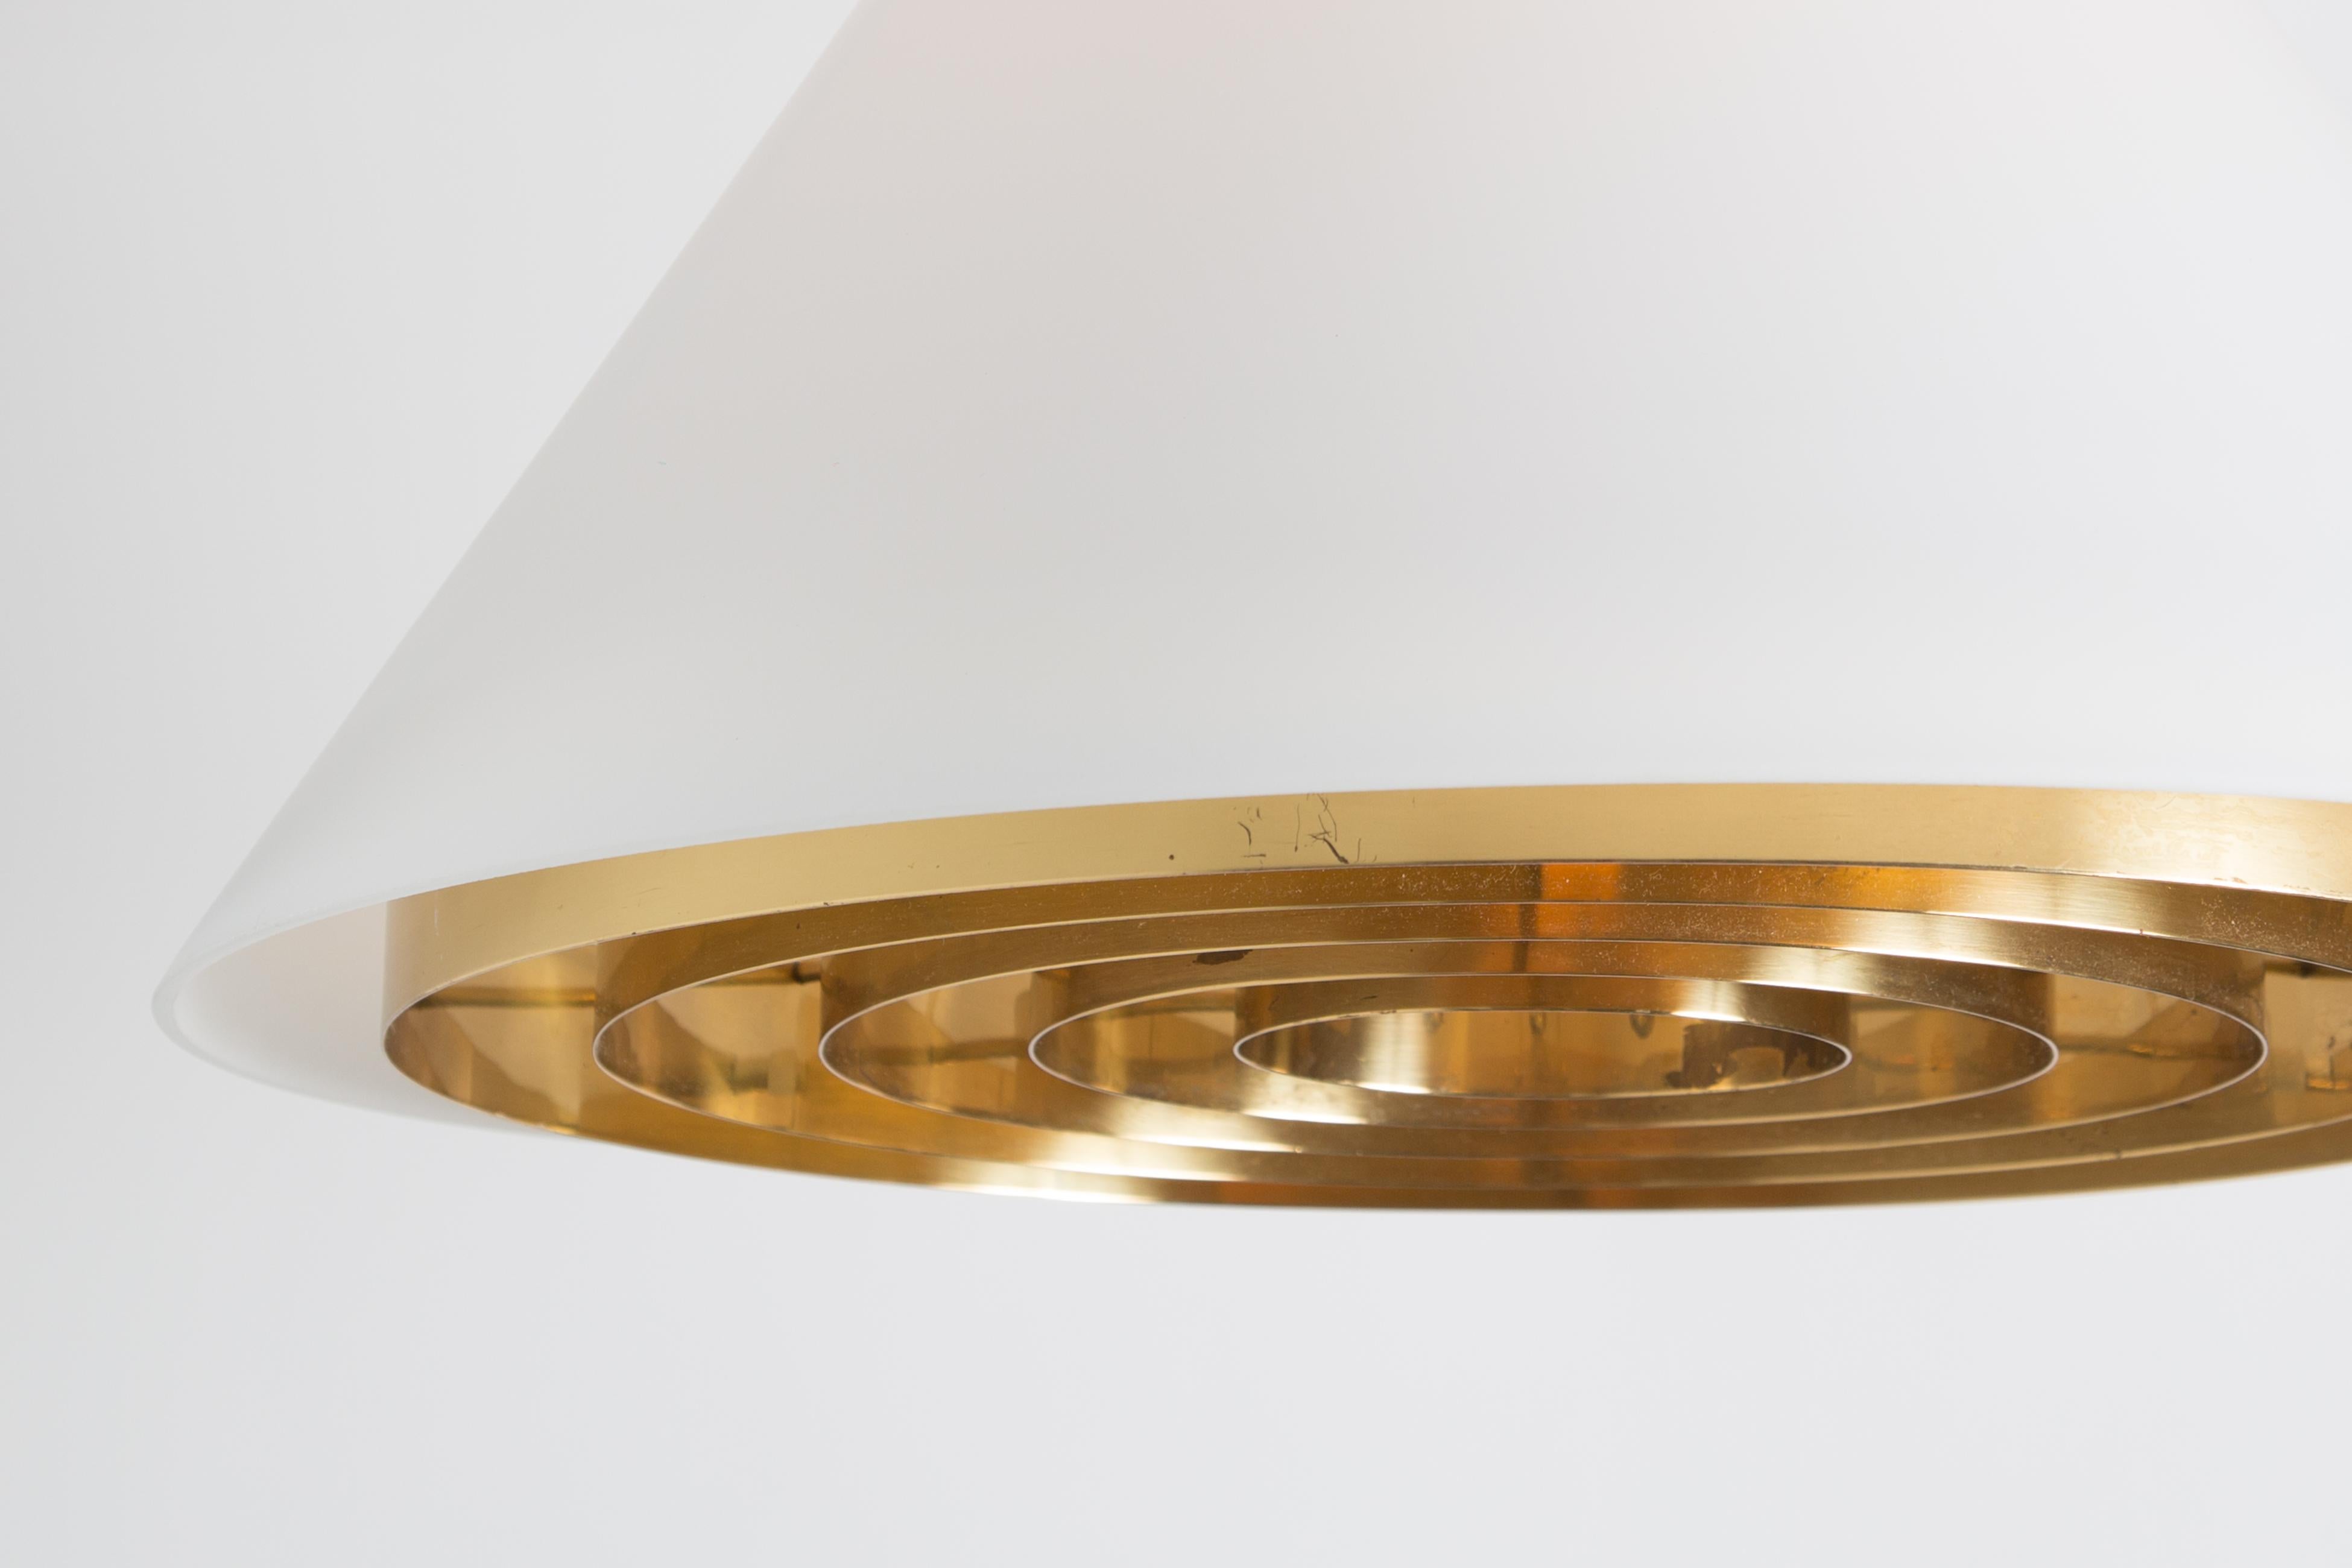 Large 1950s Lisa Johansson-Pape Model #71-127 Glass & Brass Ceiling Lamp  In Good Condition For Sale In Glendale, CA